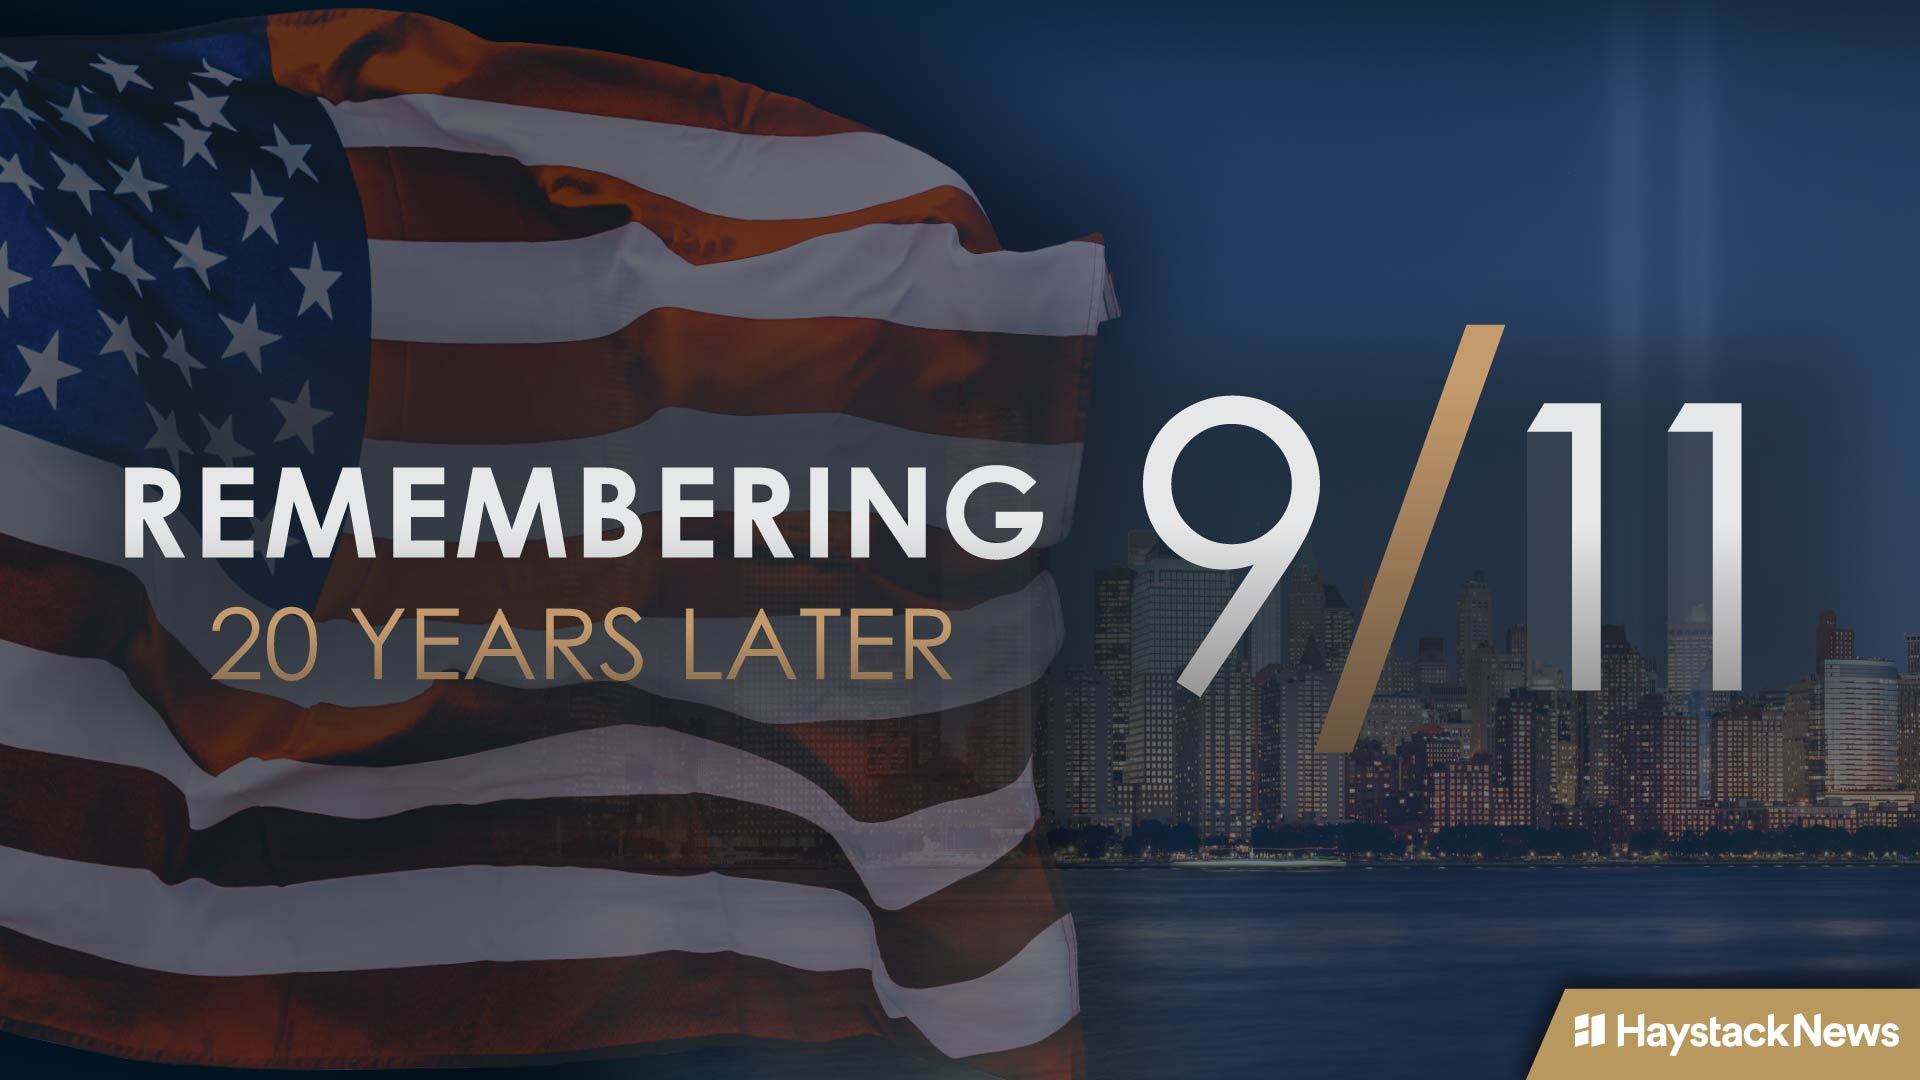 Haystack News to Launch Five New Channels This Month, Including One Remembering 9/11 Anniversary